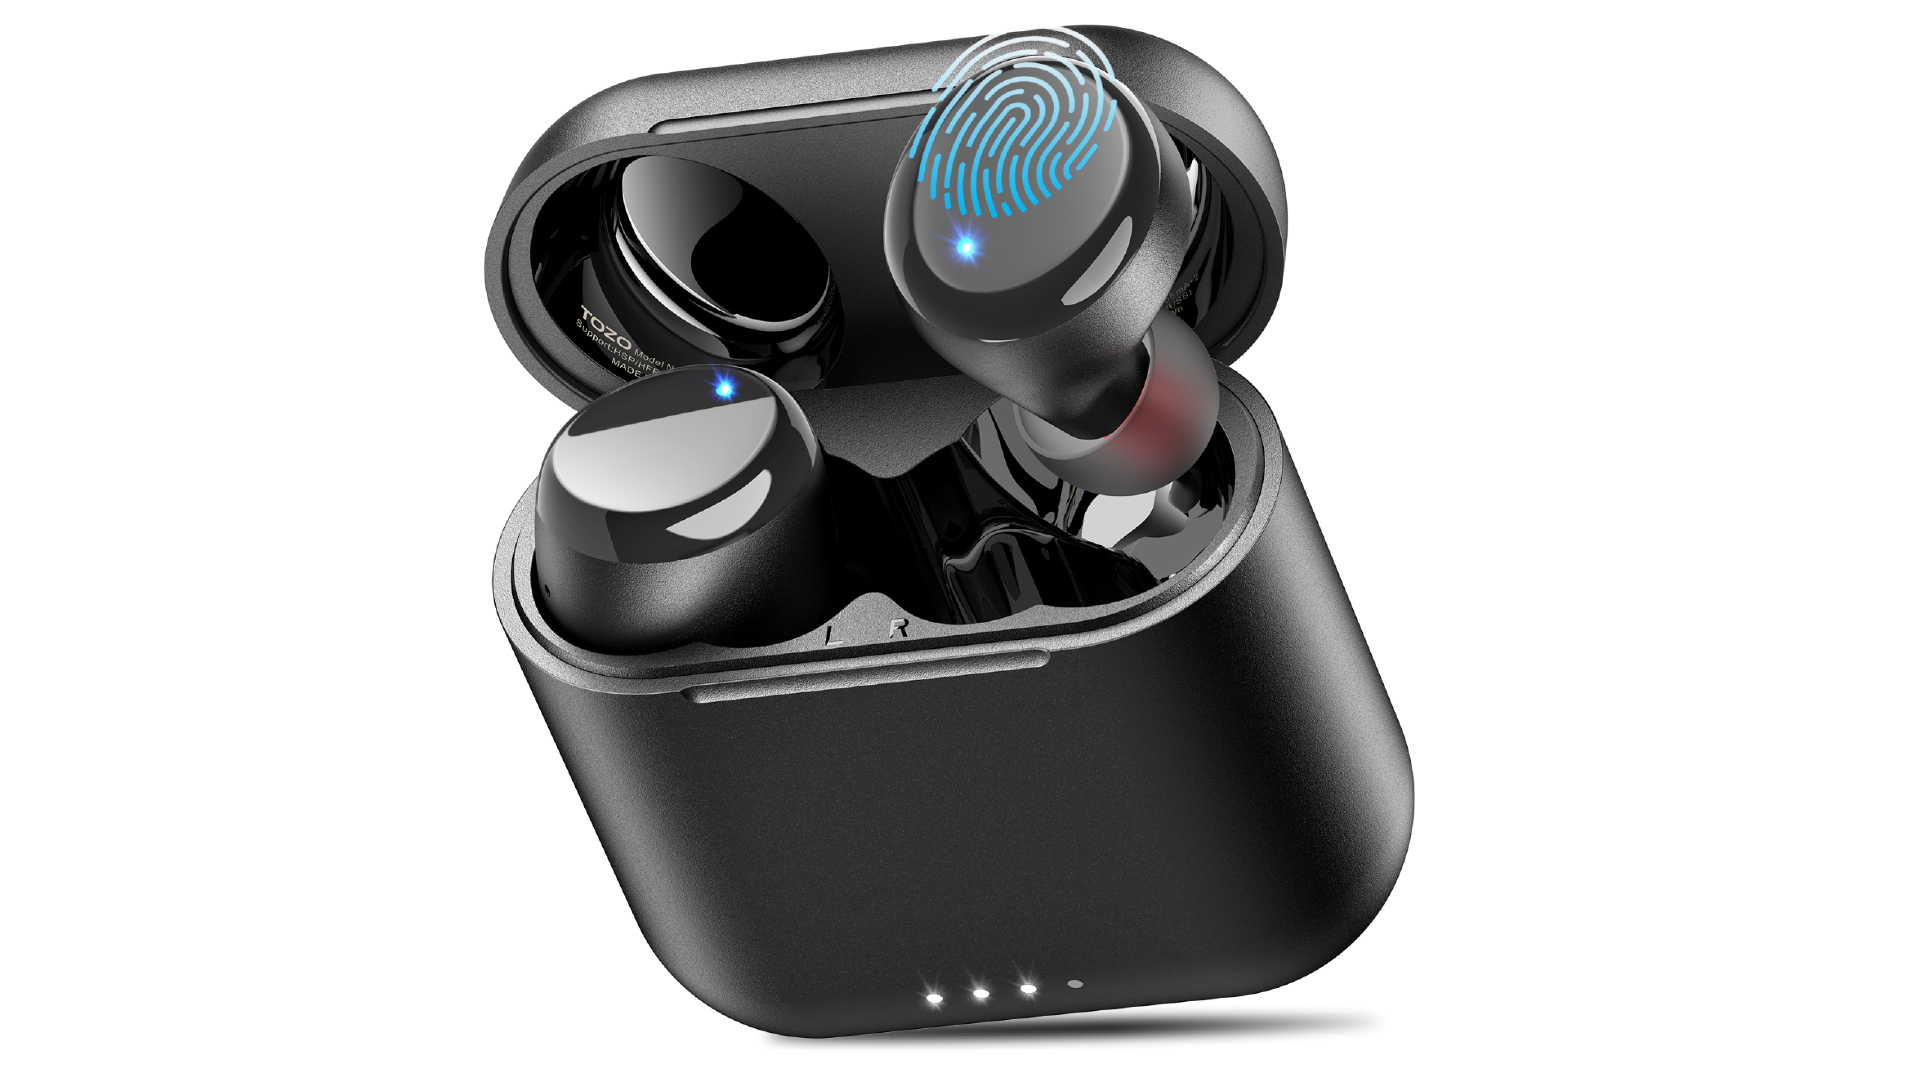 The Tozo T6 True Wireless Earbuds are on sale at